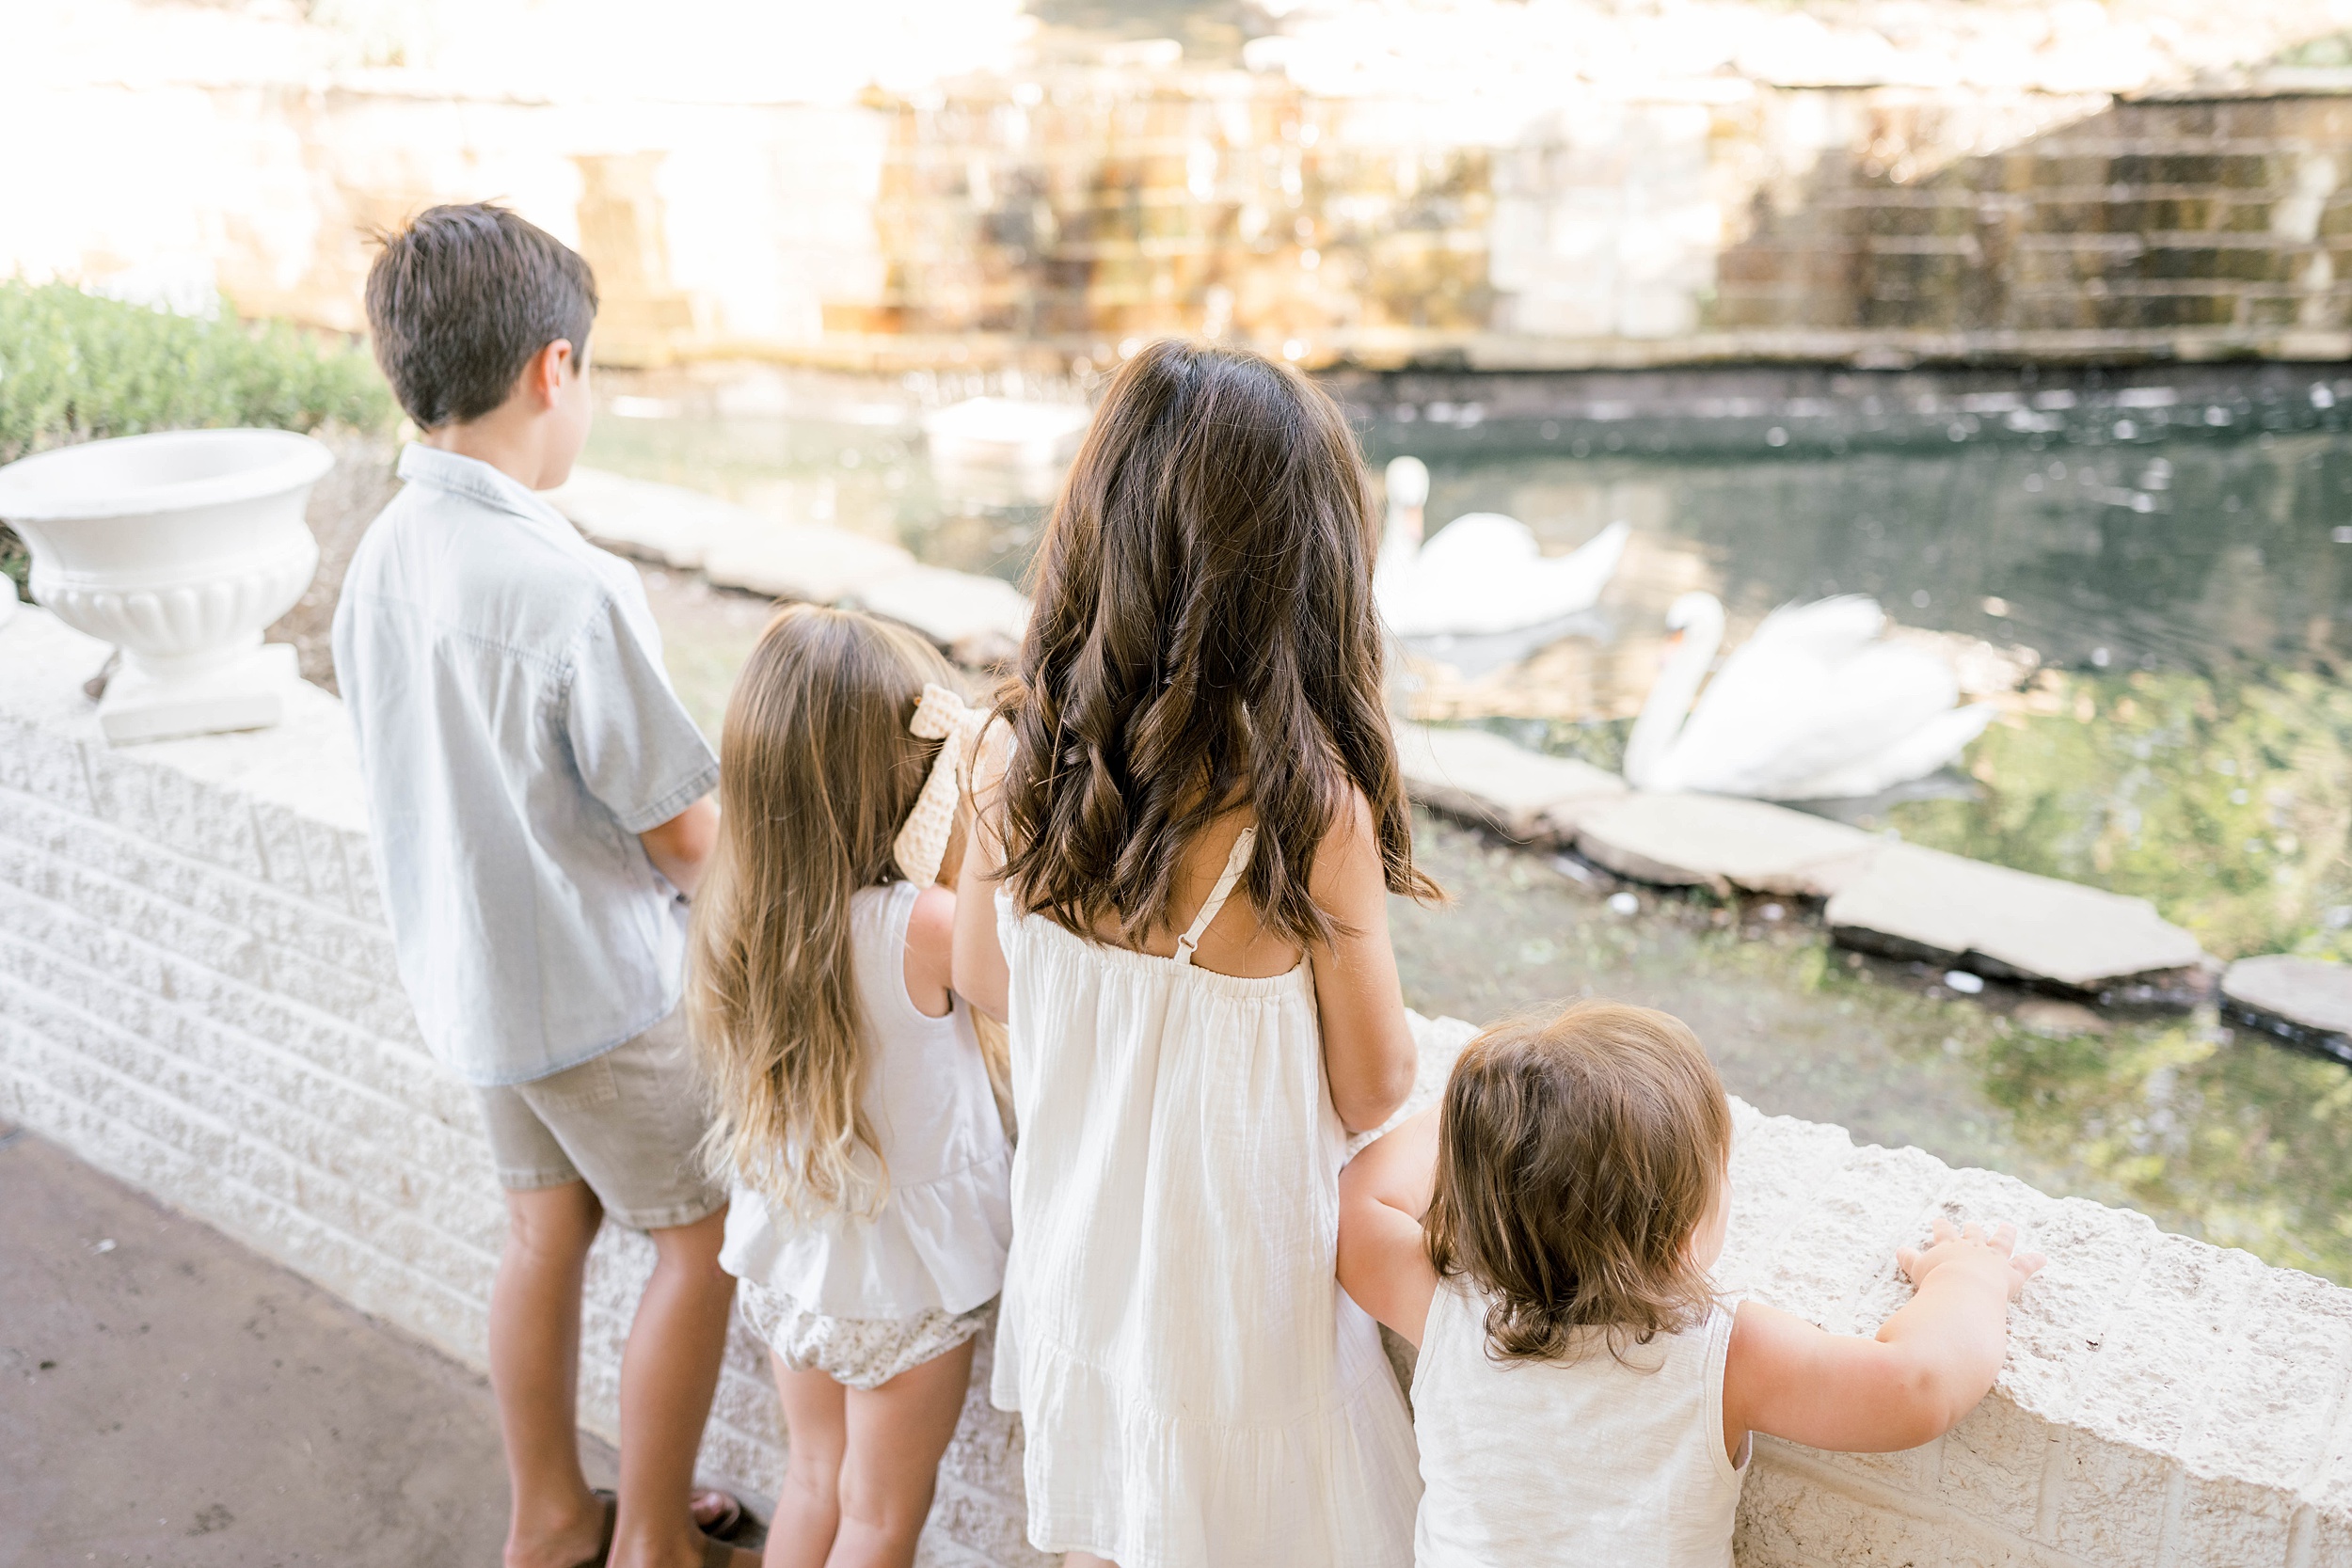 Four young siblings stand on against a wall overlooking swans in a pond before visiting kid friendly restaurants okc